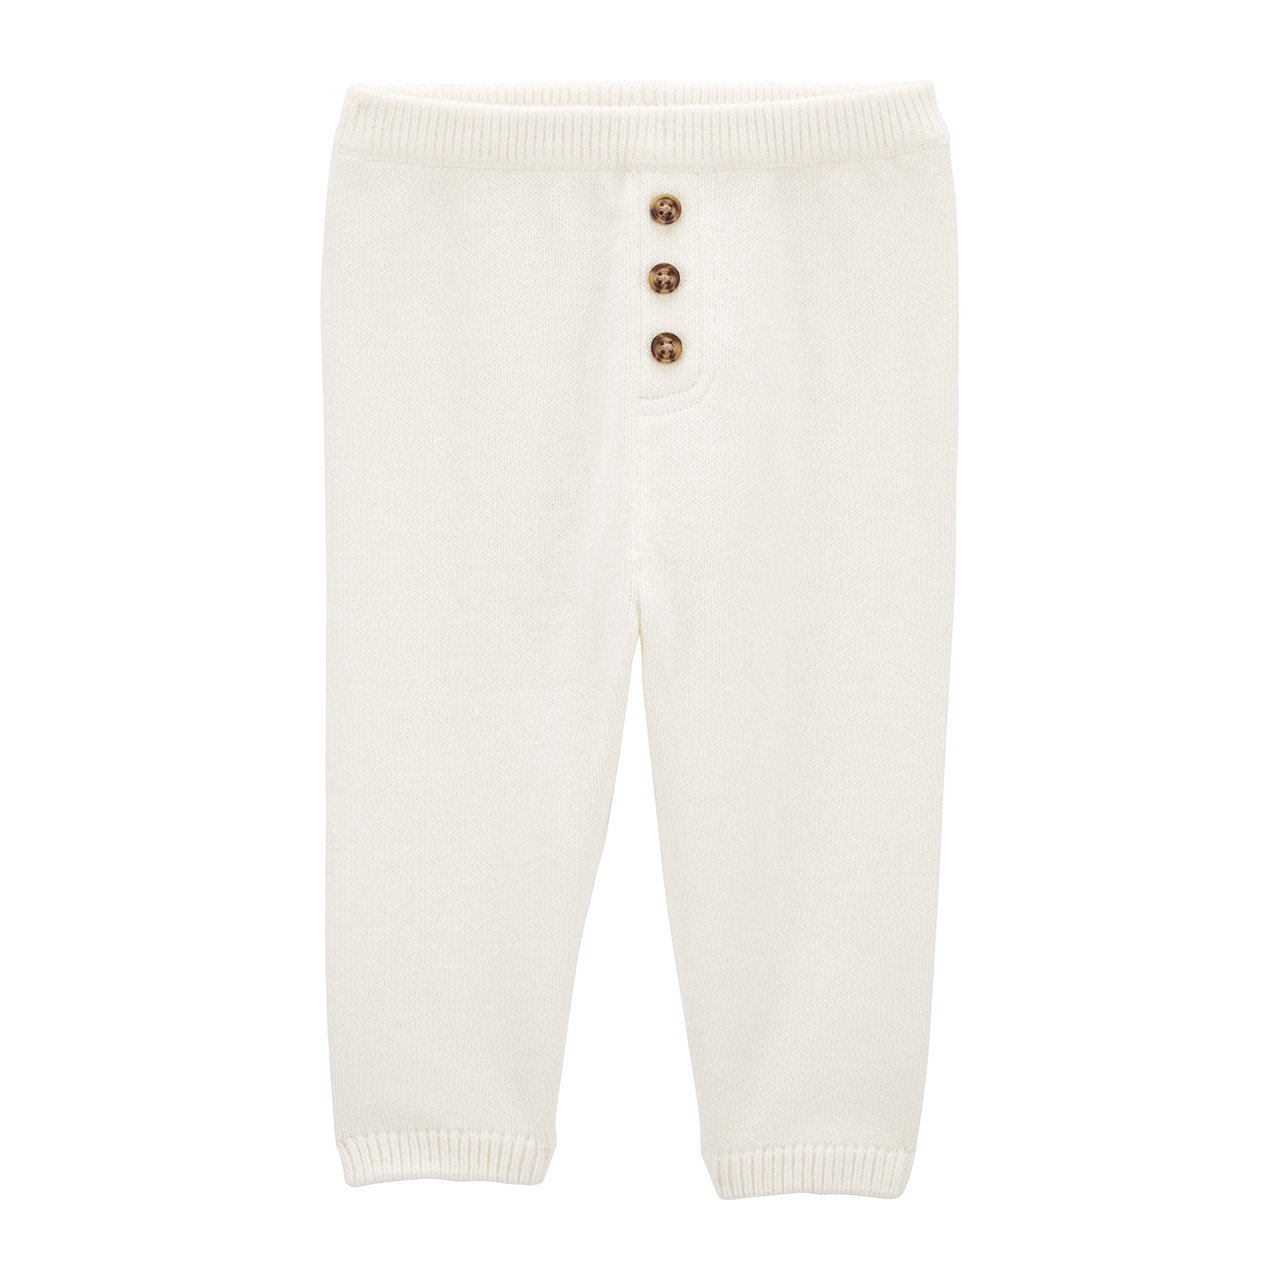 A pair of white leggings for babies.